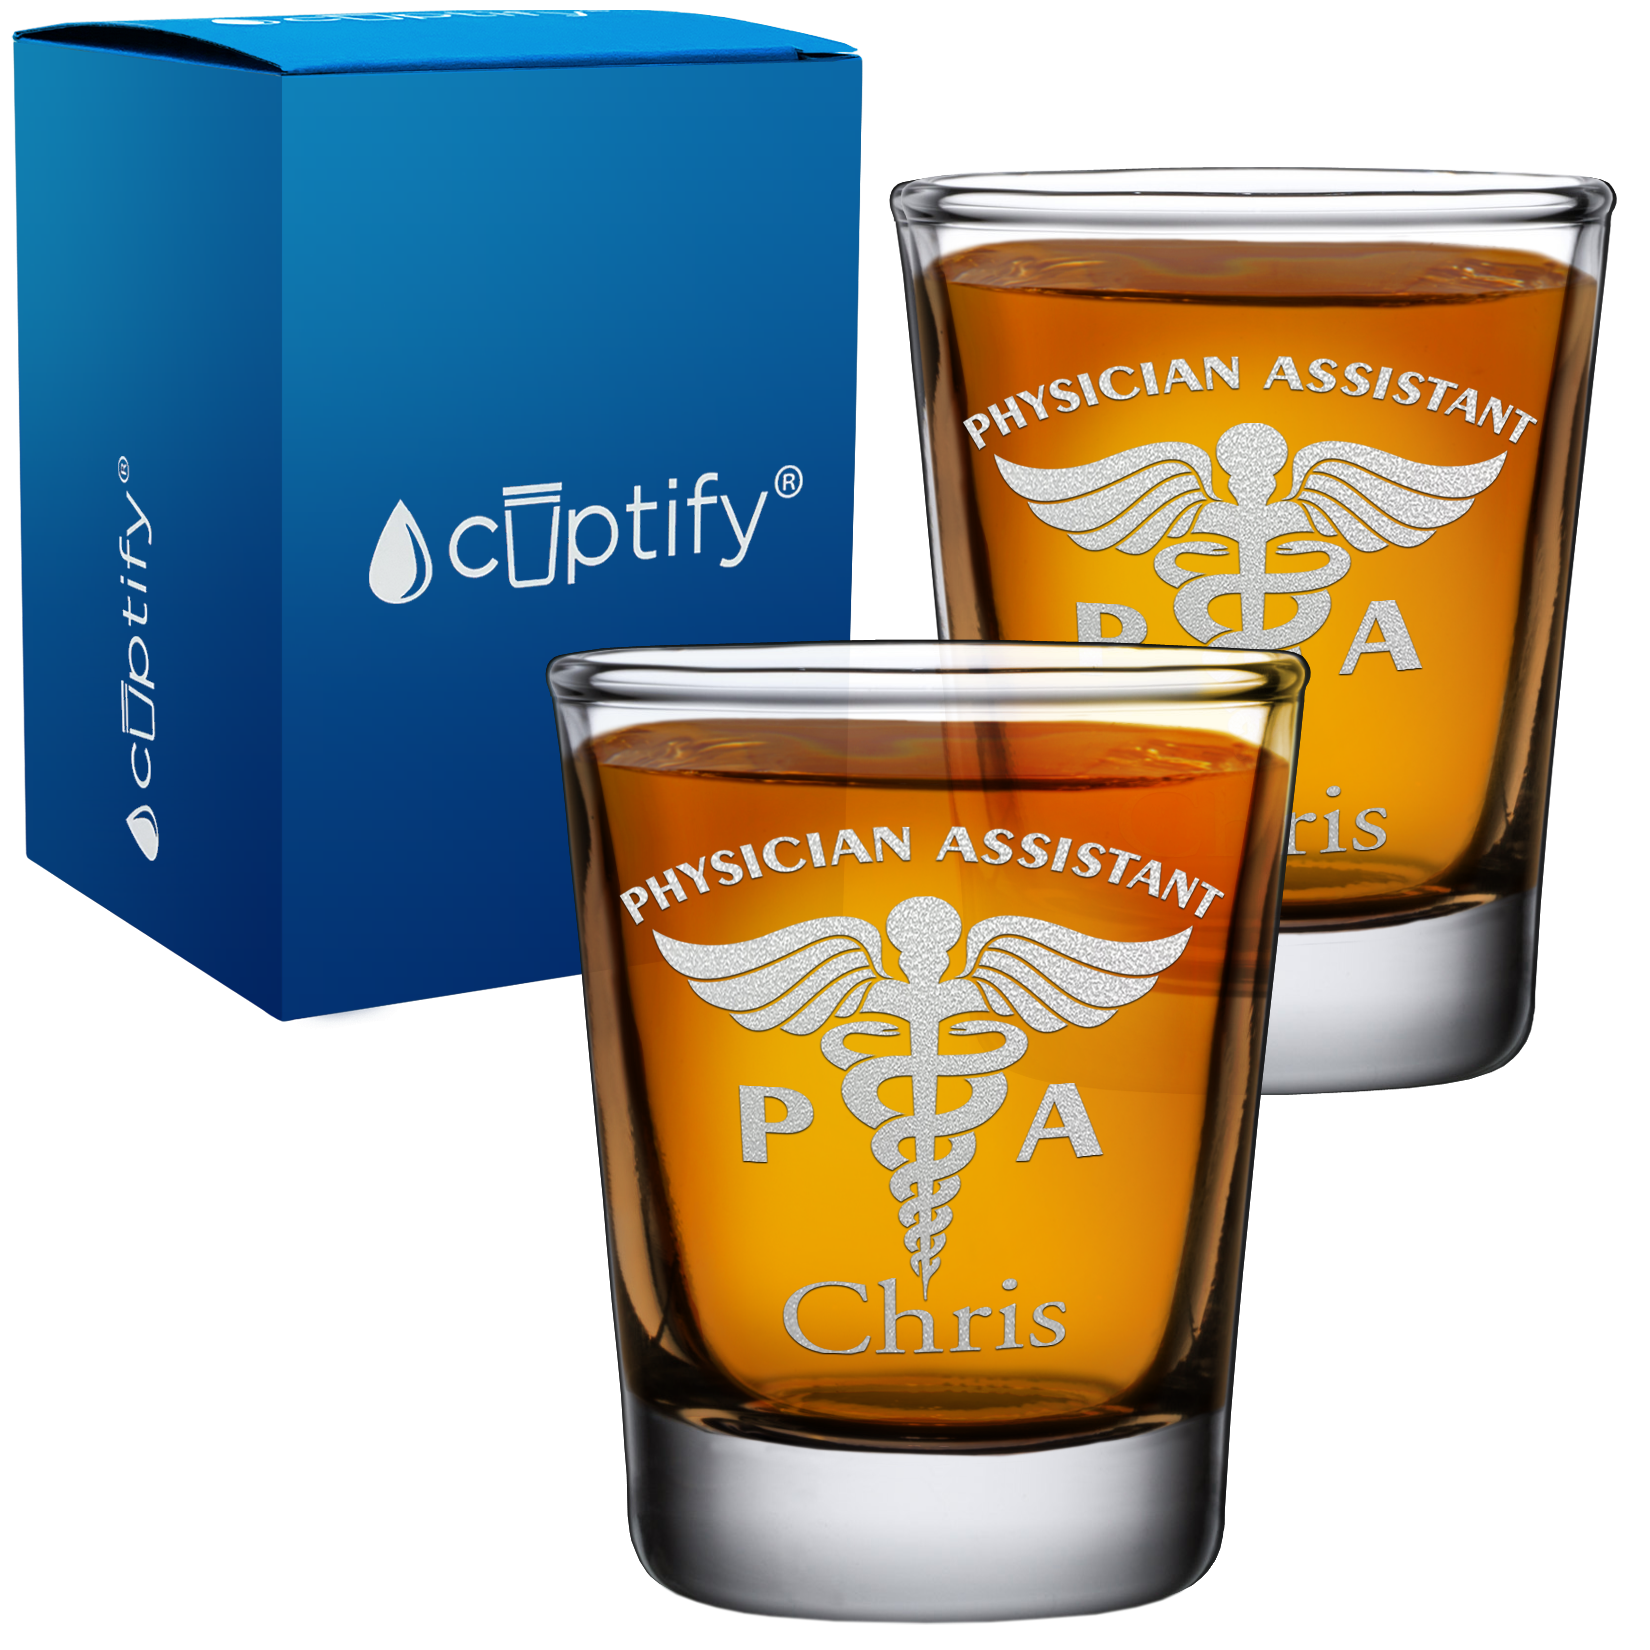 Personalized PA Physician Assistant on 2oz Shot Glasses - Set of 2